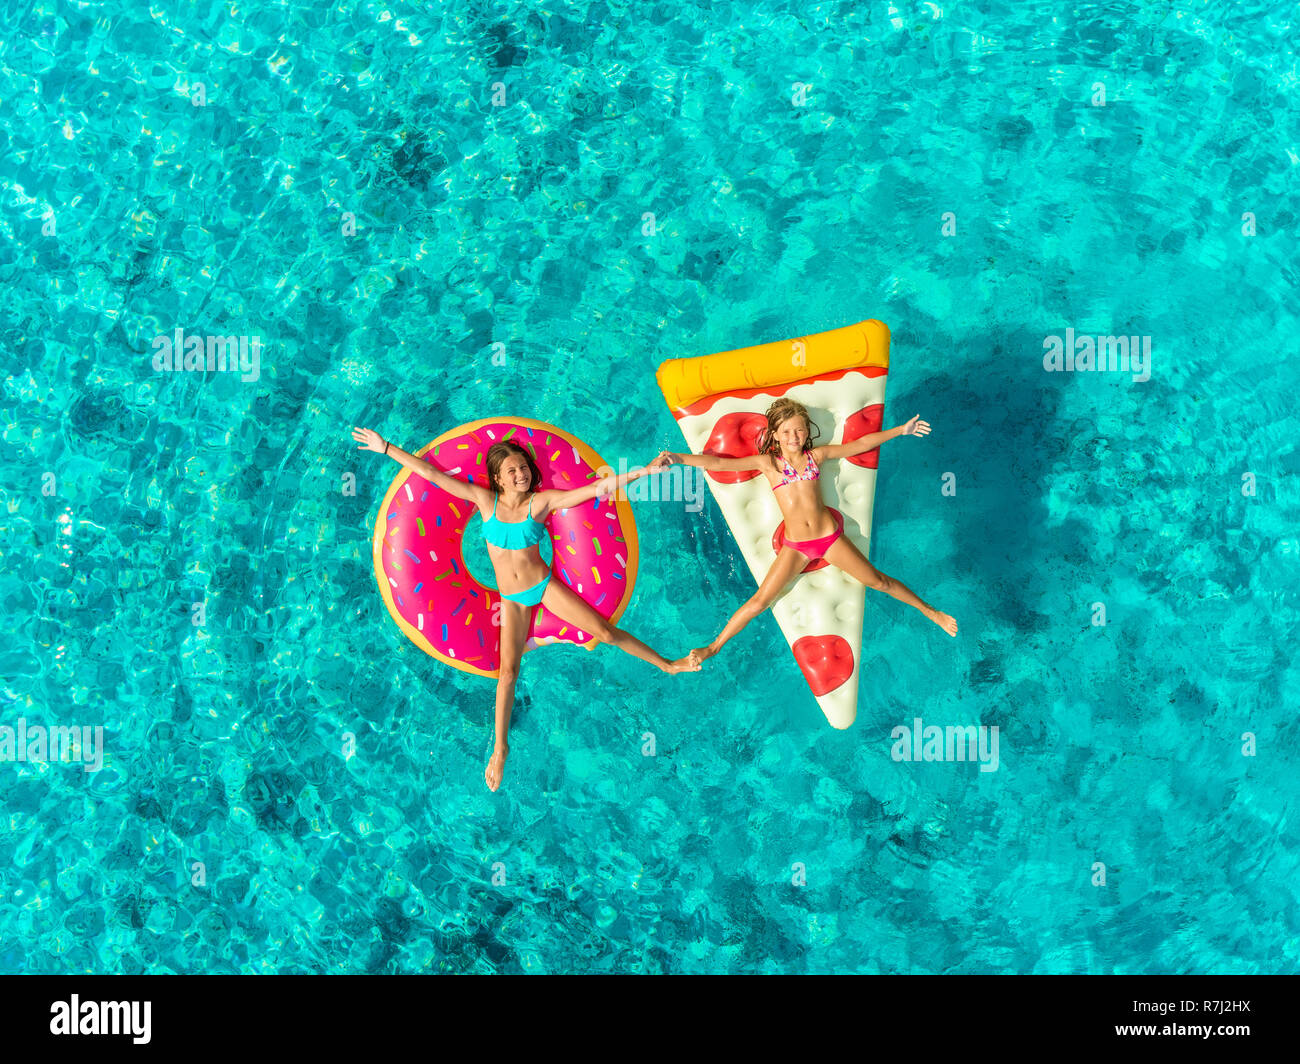 Aerial view of two young girls floating in sea on pizza and donut shaped inflatable holding hands, touching feet and smiling. Stock Photo